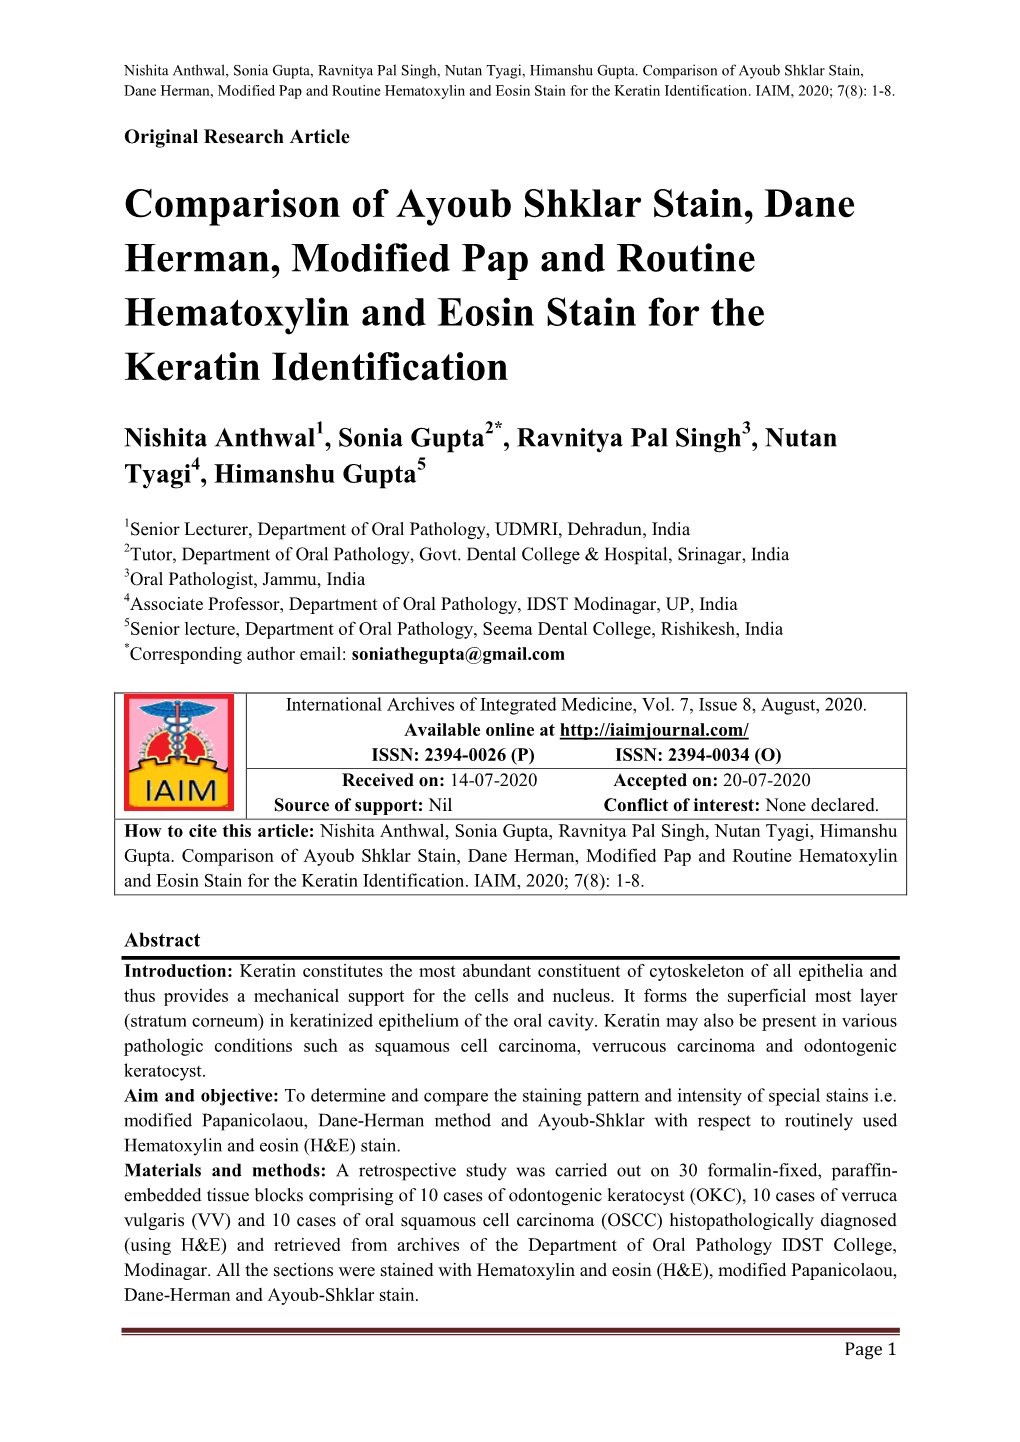 Comparison of Ayoub Shklar Stain, Dane Herman, Modified Pap and Routine Hematoxylin and Eosin Stain for the Keratin Identification